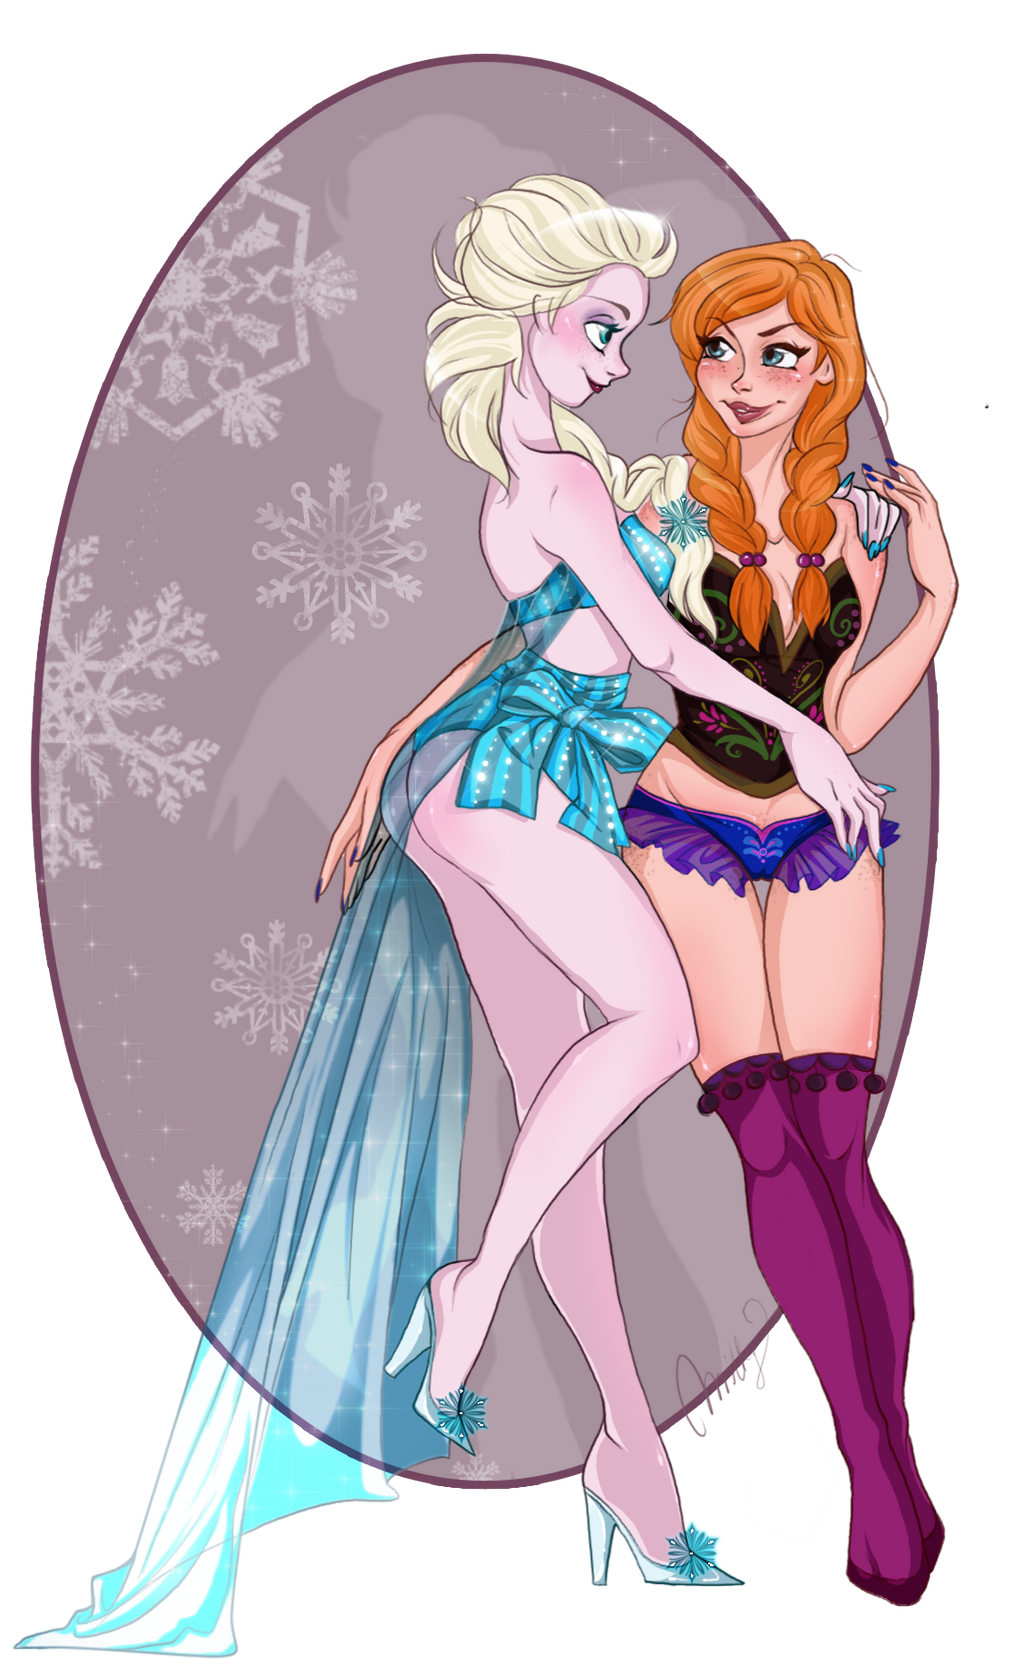 help_me_warm_this_frozen_heart_by_cigarscigarettes-d74ve3b.png